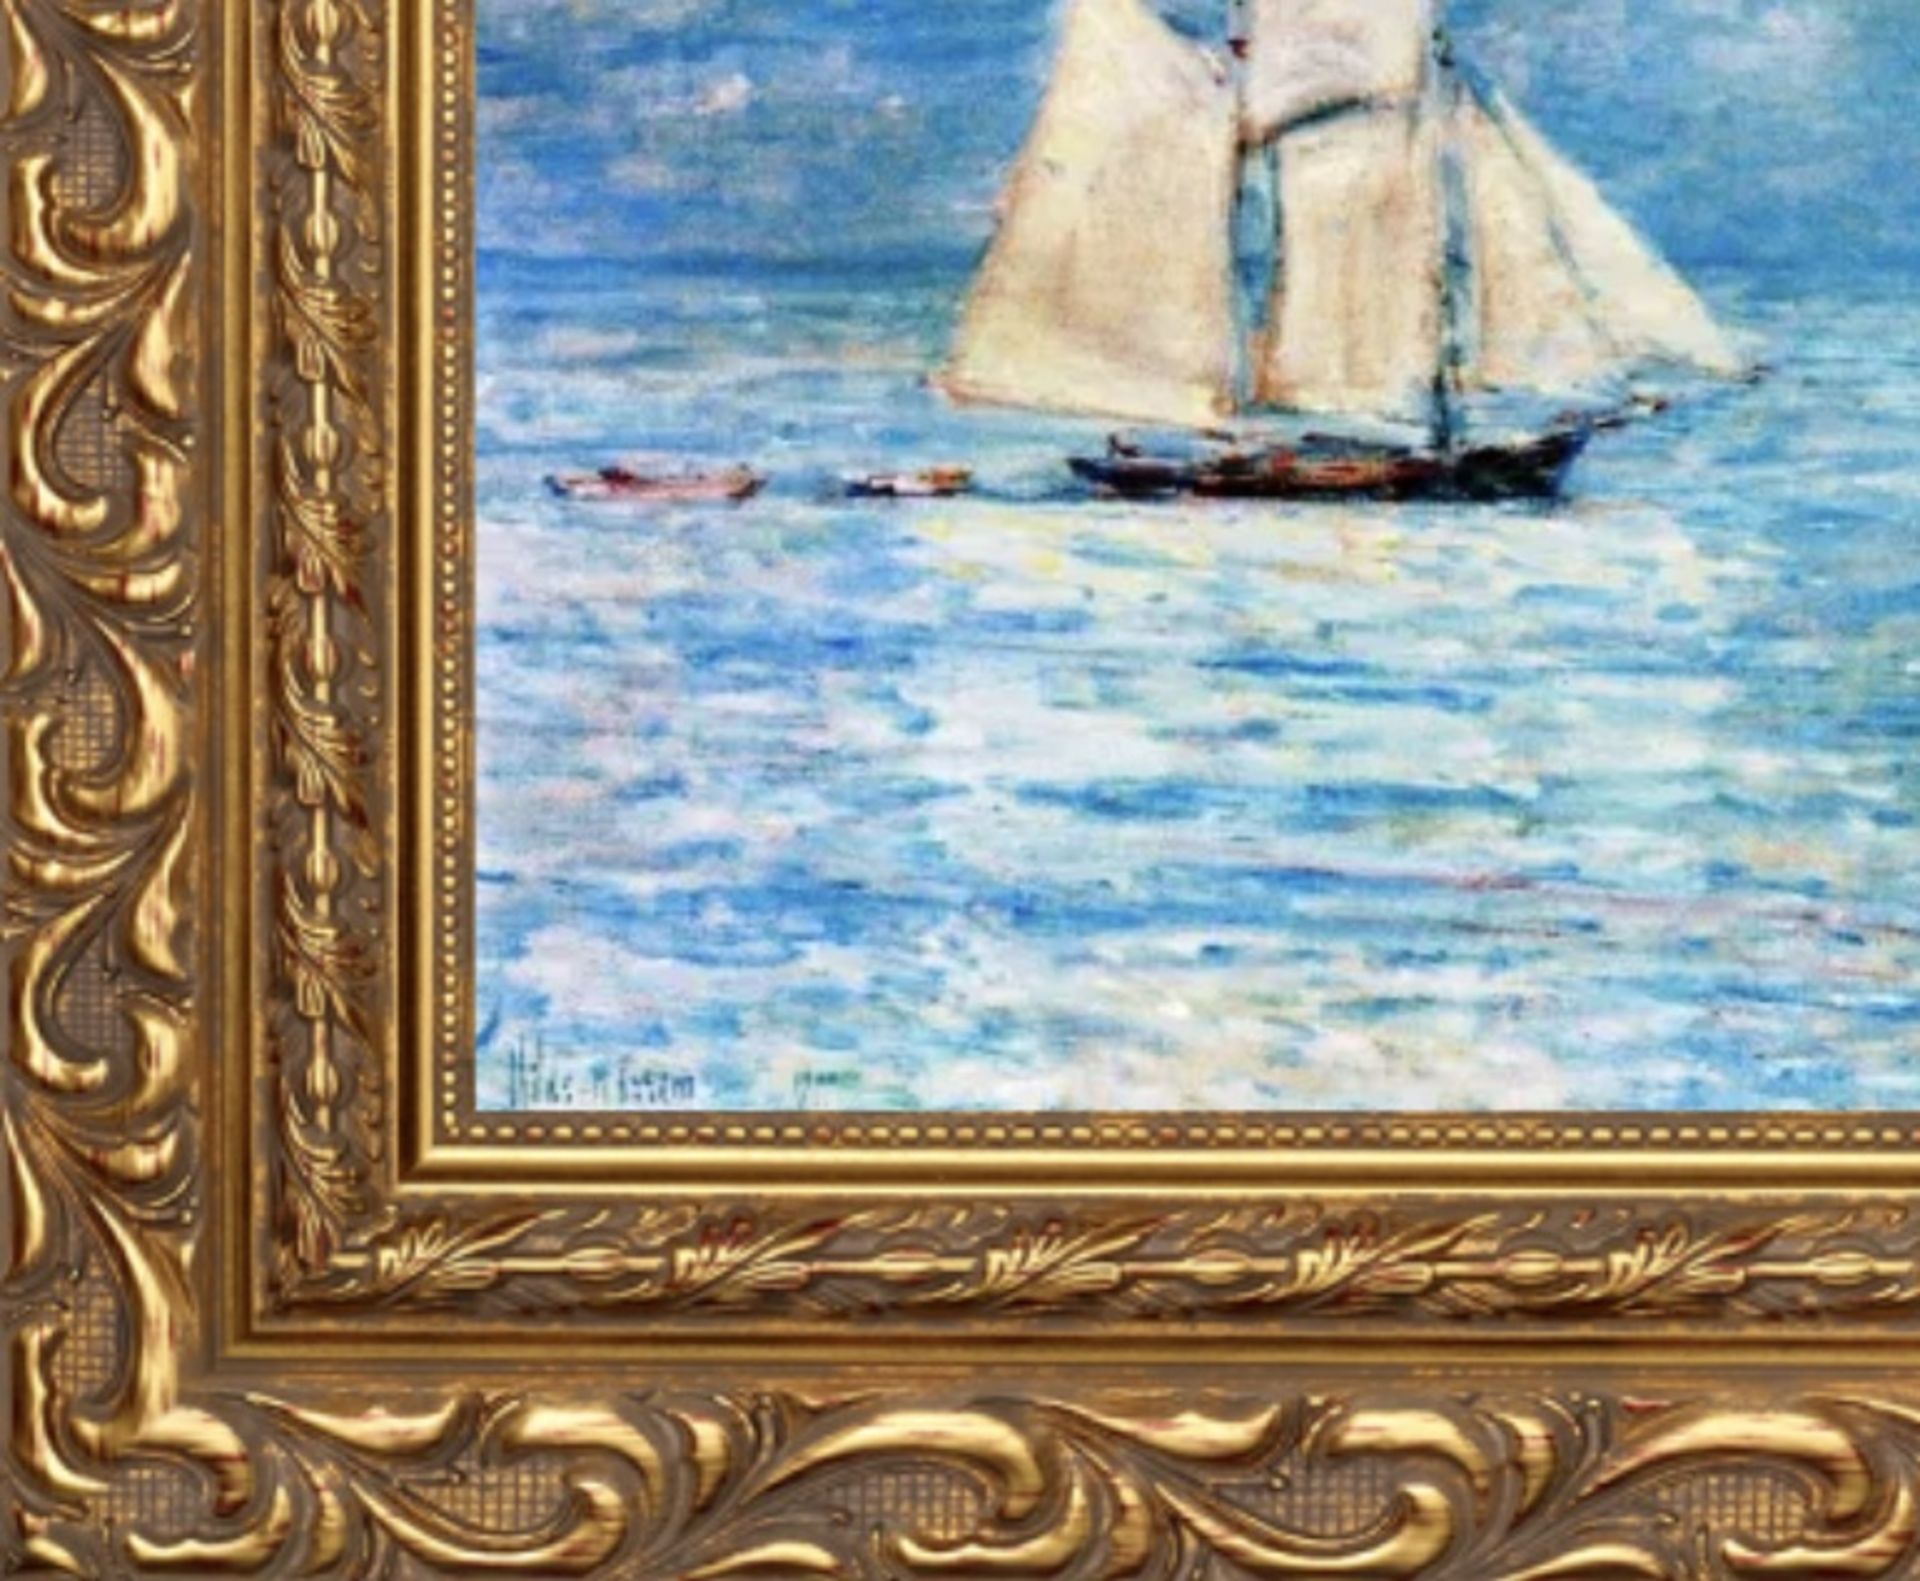 Frederick Childe Hassam "Sailing on Calm Seas, Gloucester Harbor" Oil Painting - Image 5 of 5